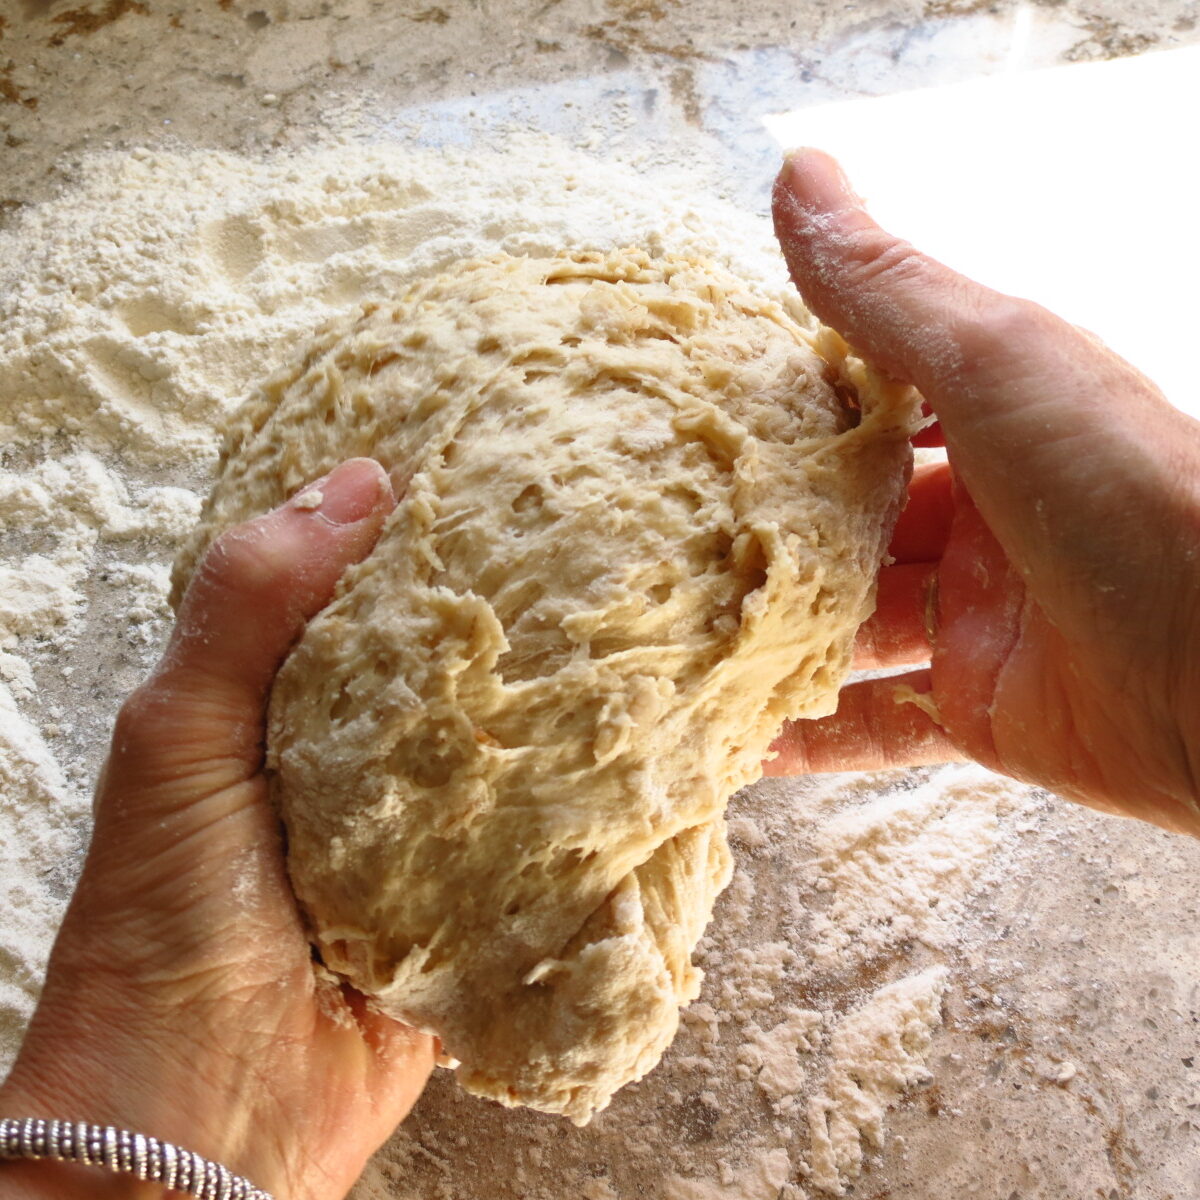 Two hands handling bread dough over a floured surface.